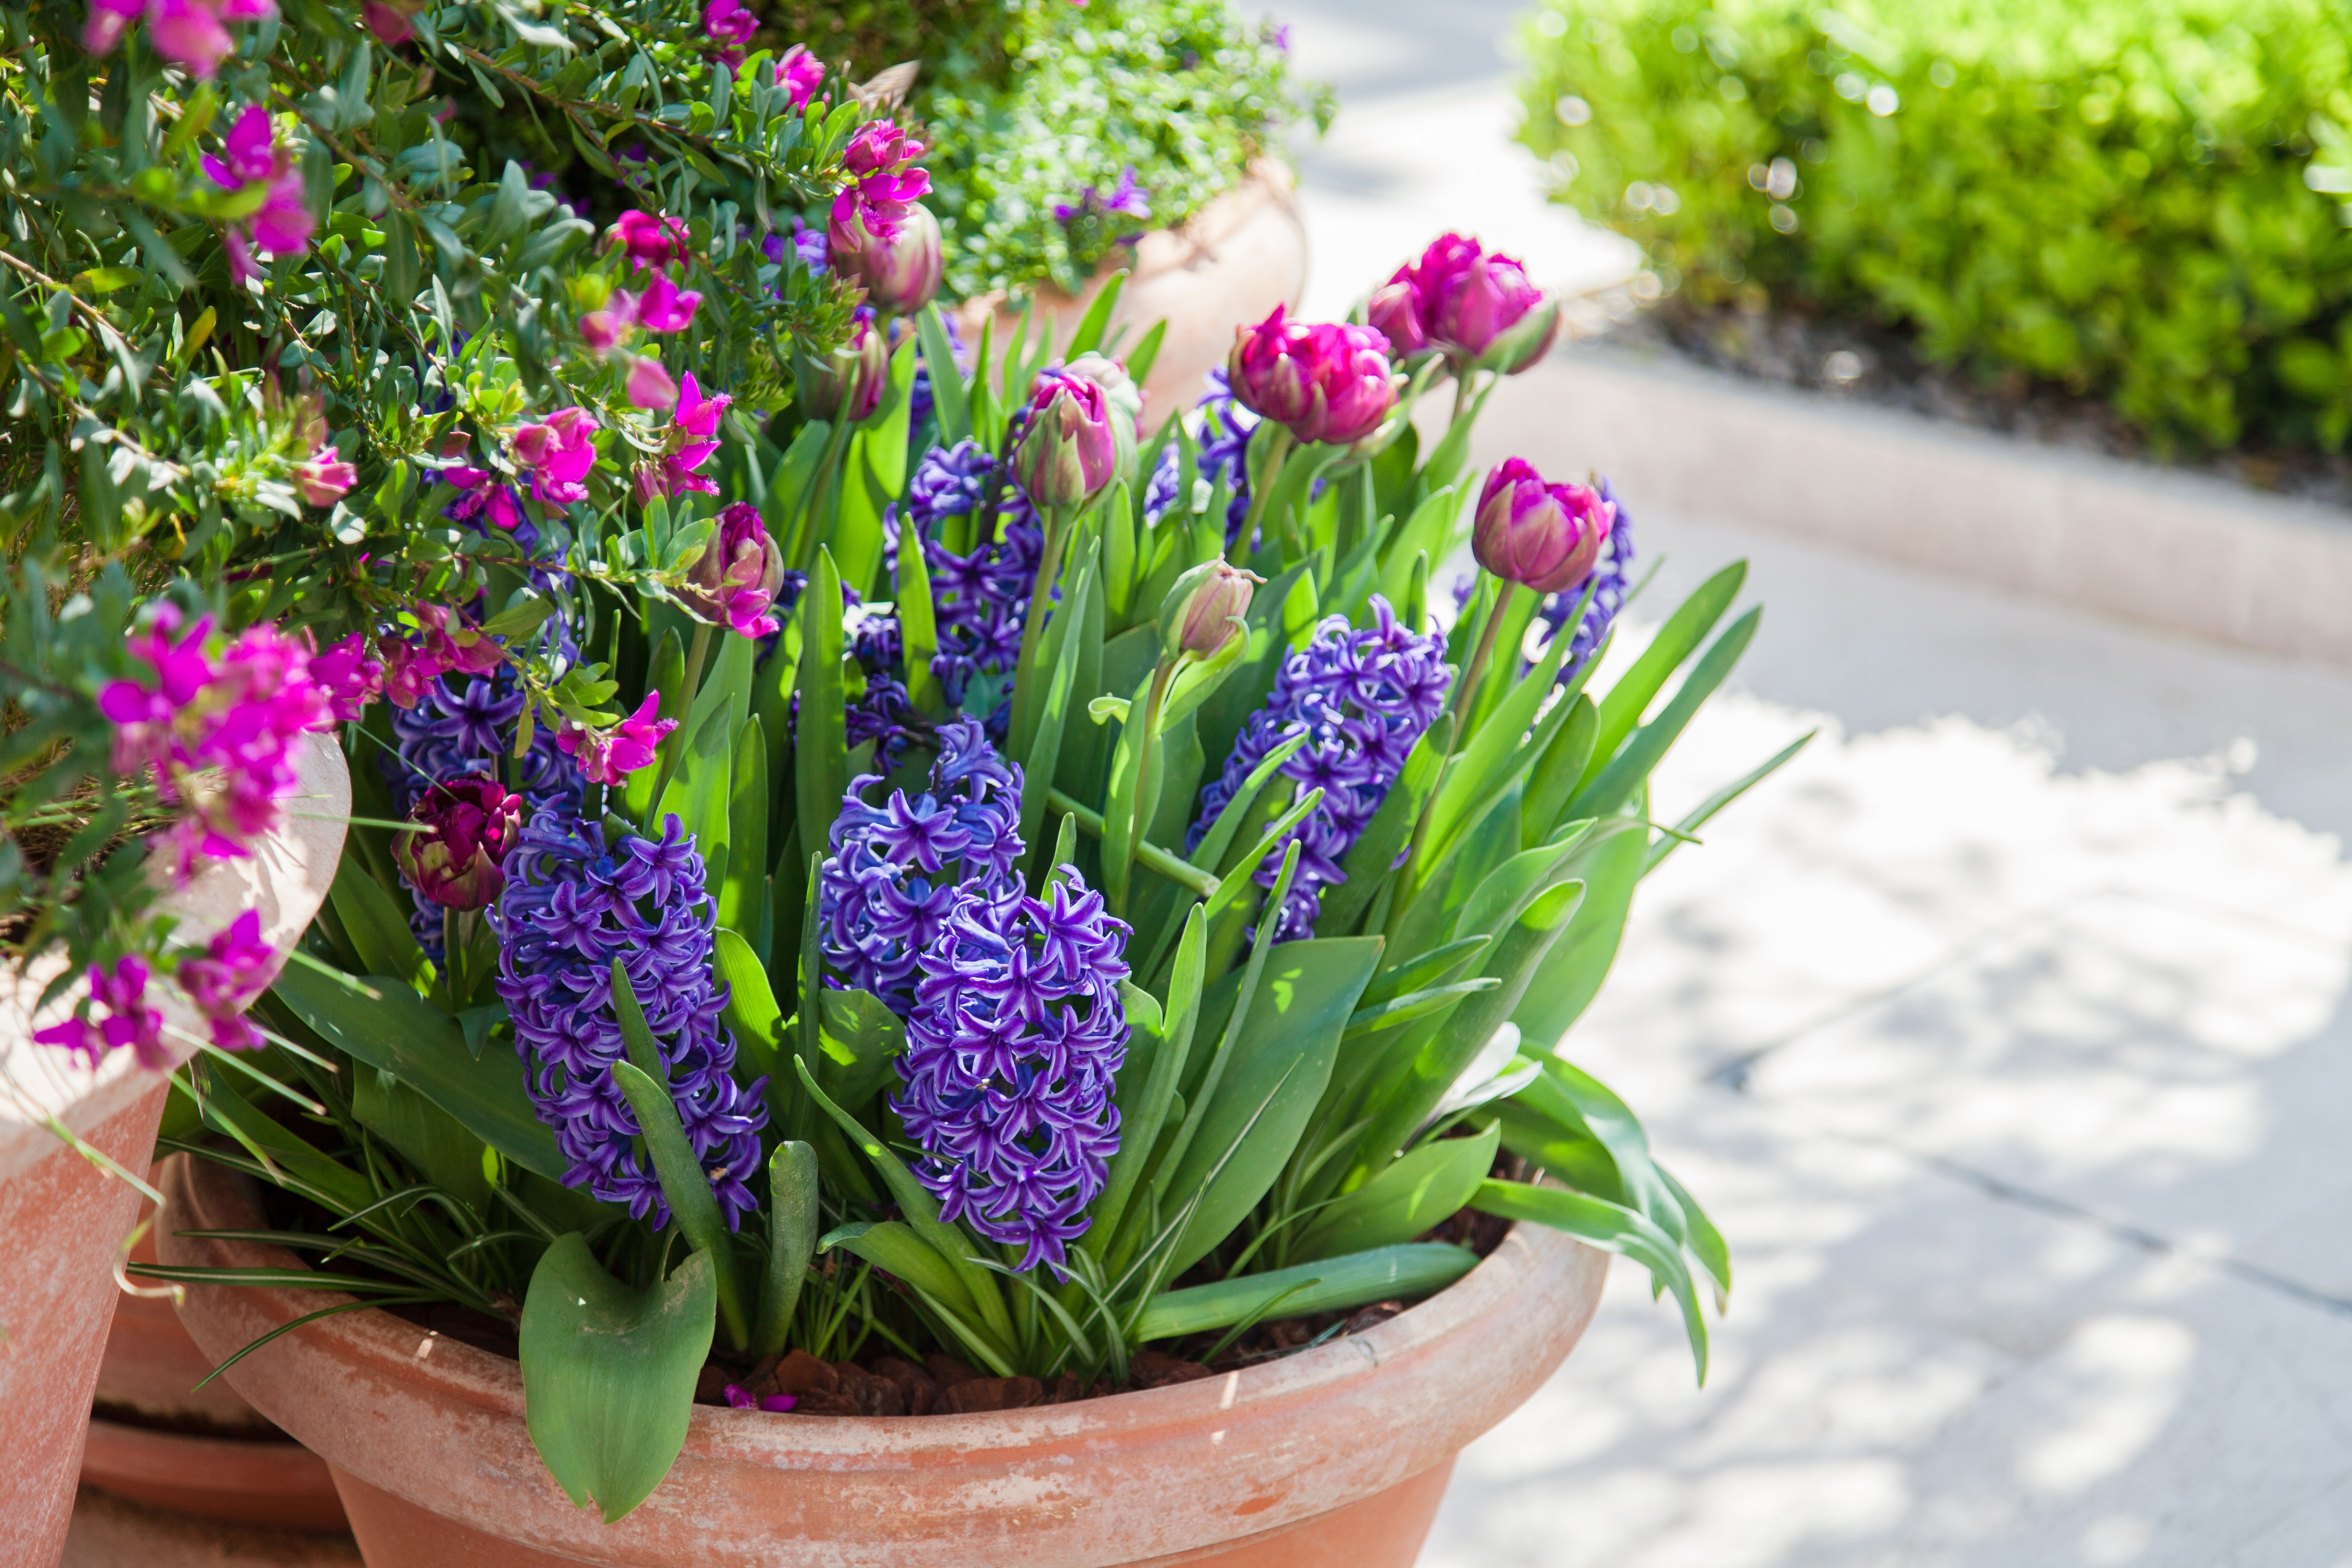 Tulips and hyacinth in flower pots outdoor. Spring gardening on town streets. Spring scenes, Purple, pink and lilac blooming flora and green grass.